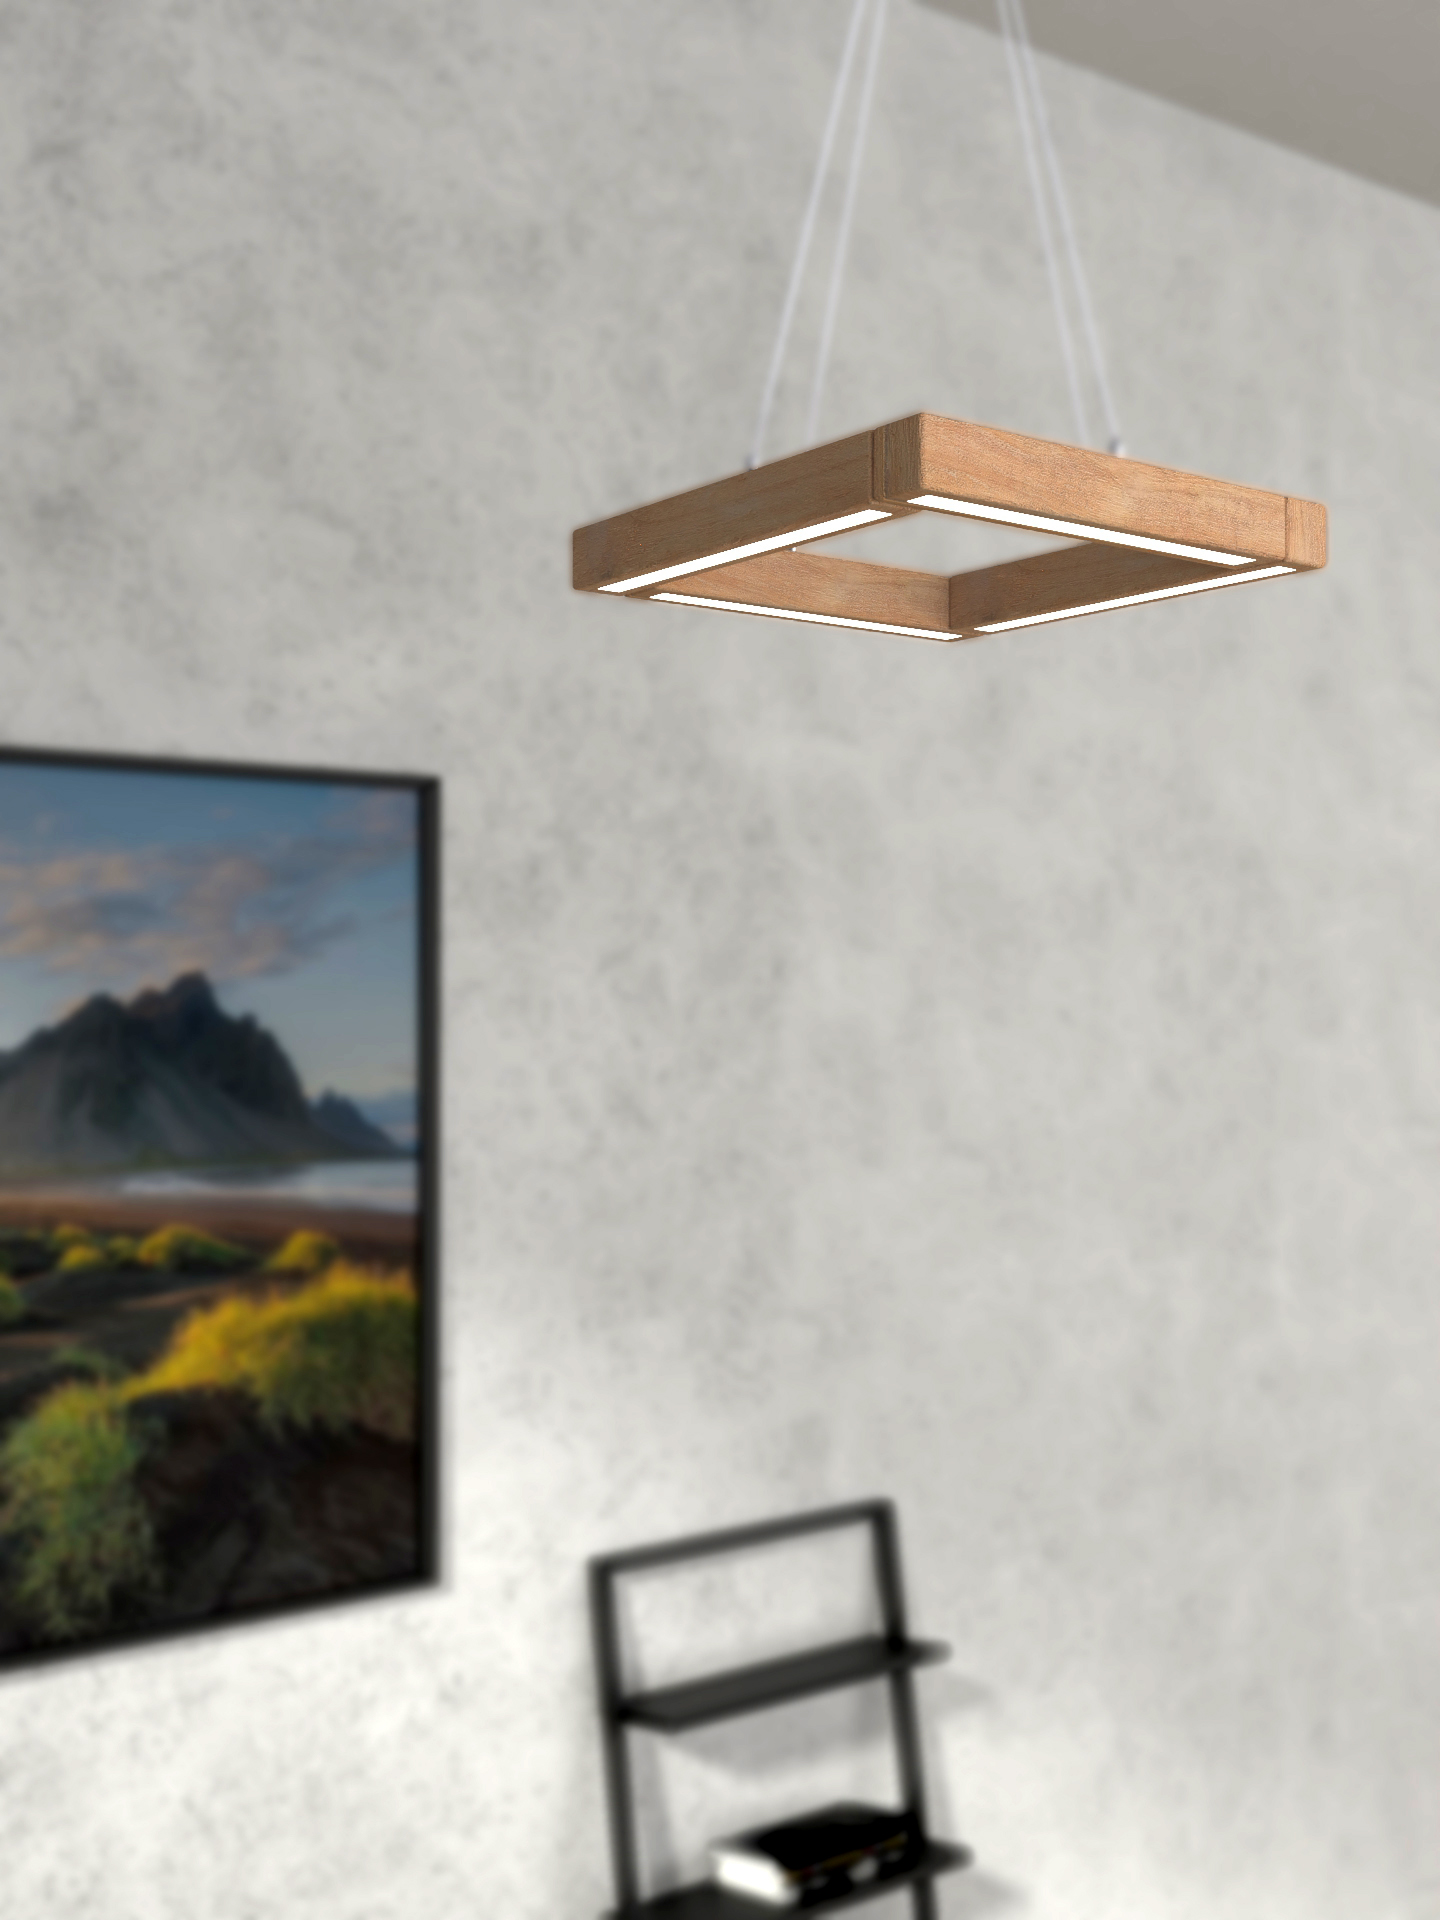 Classy lean Pendant lights with wood